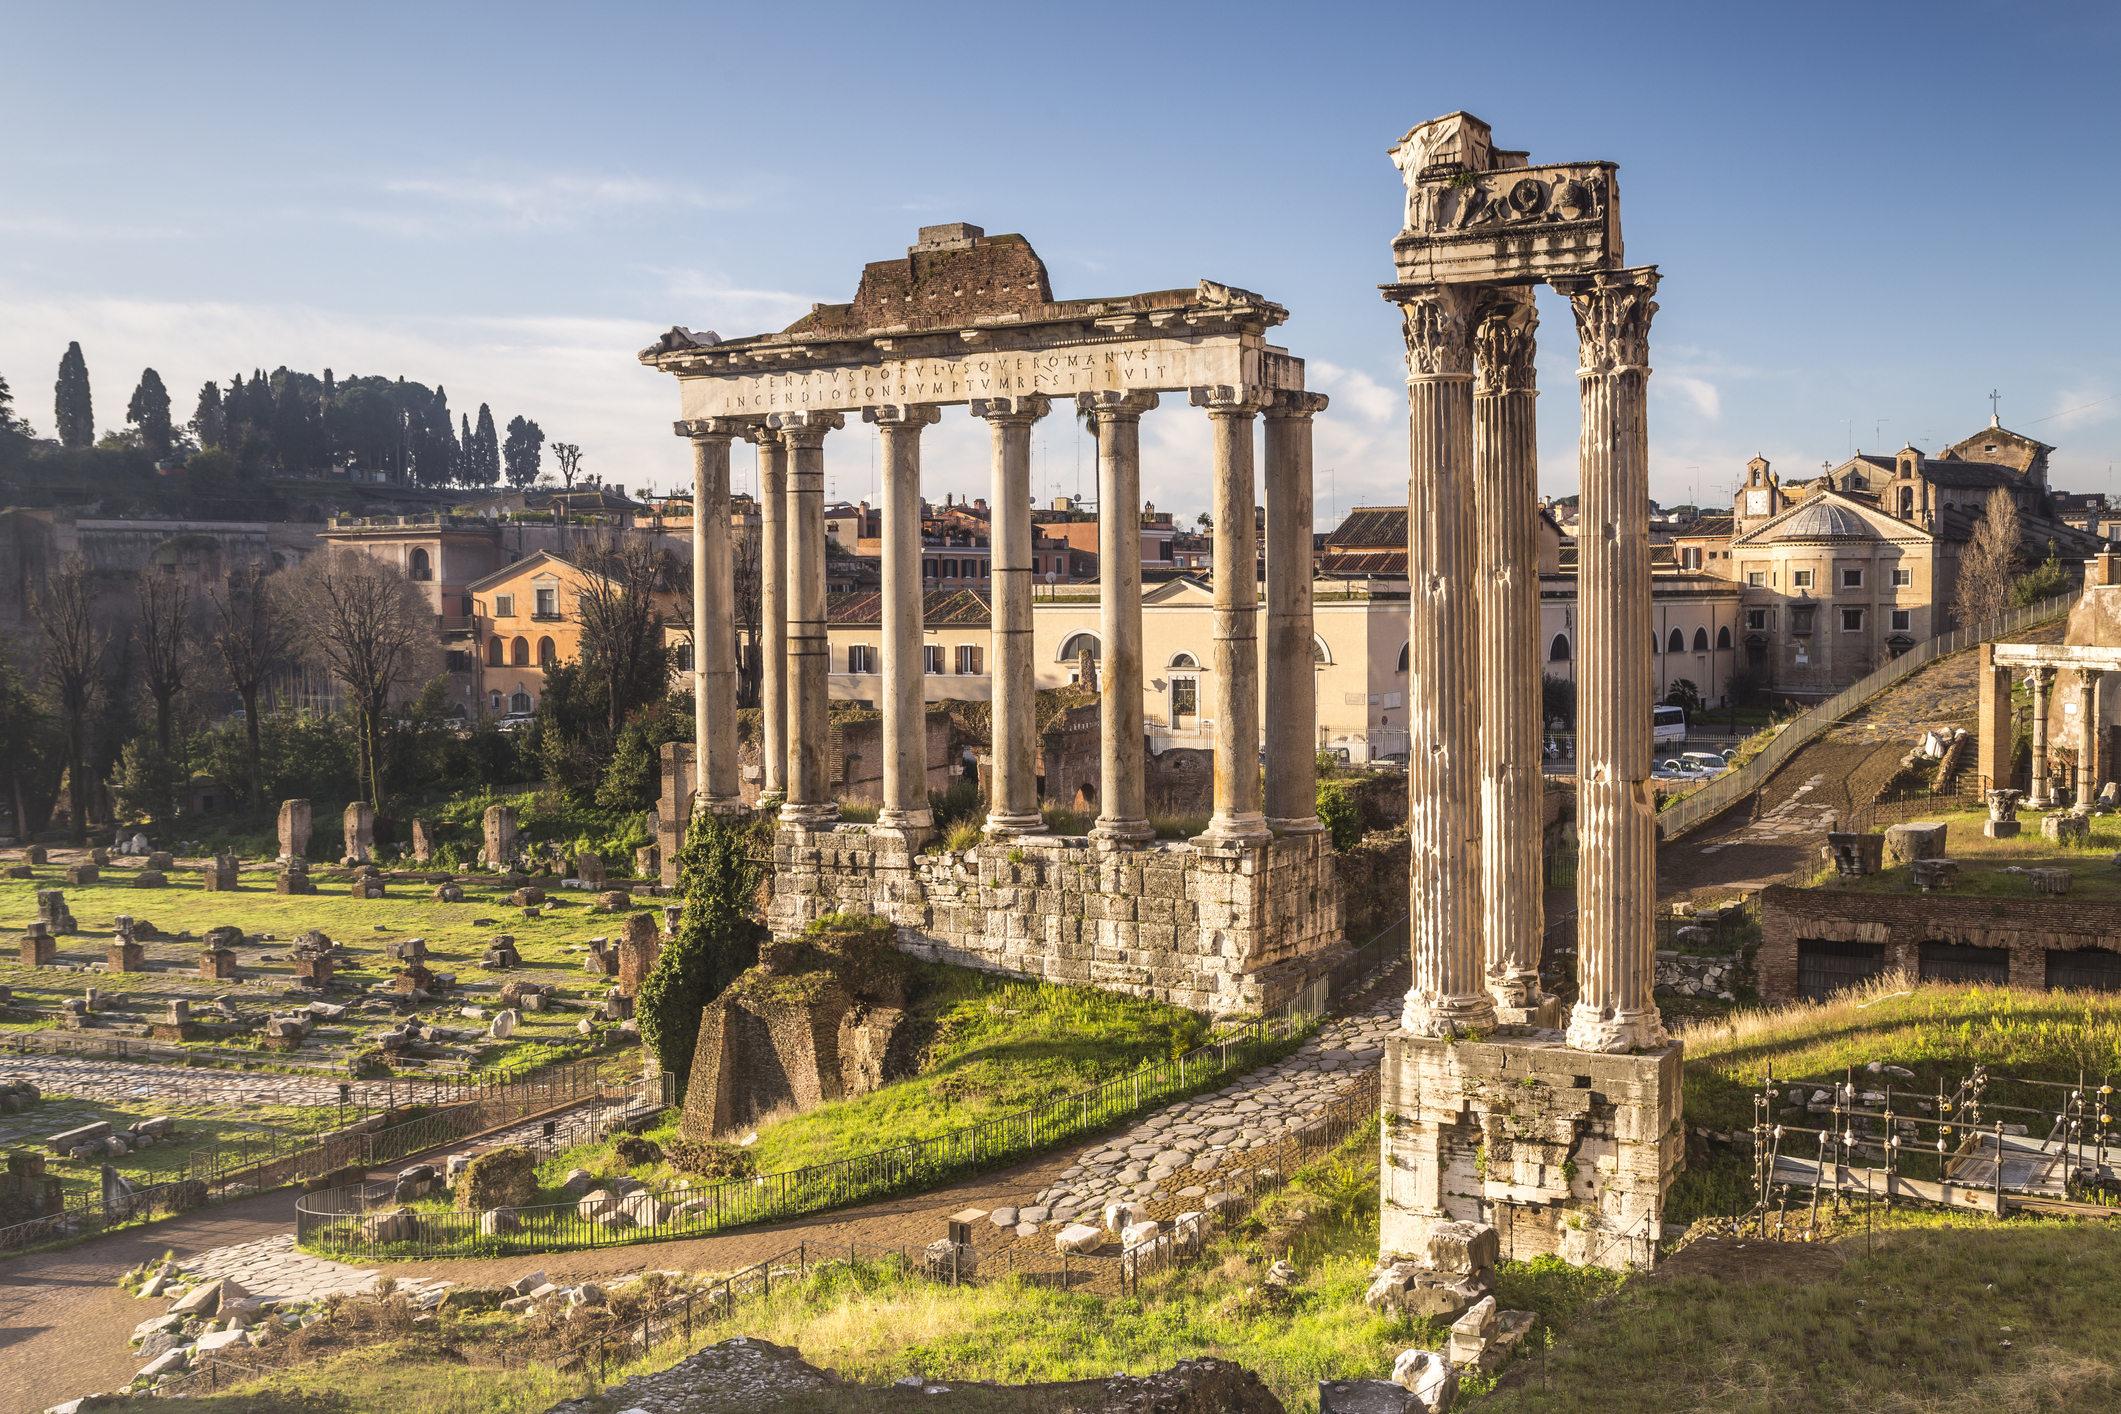 The ruins of the Forum in Rome